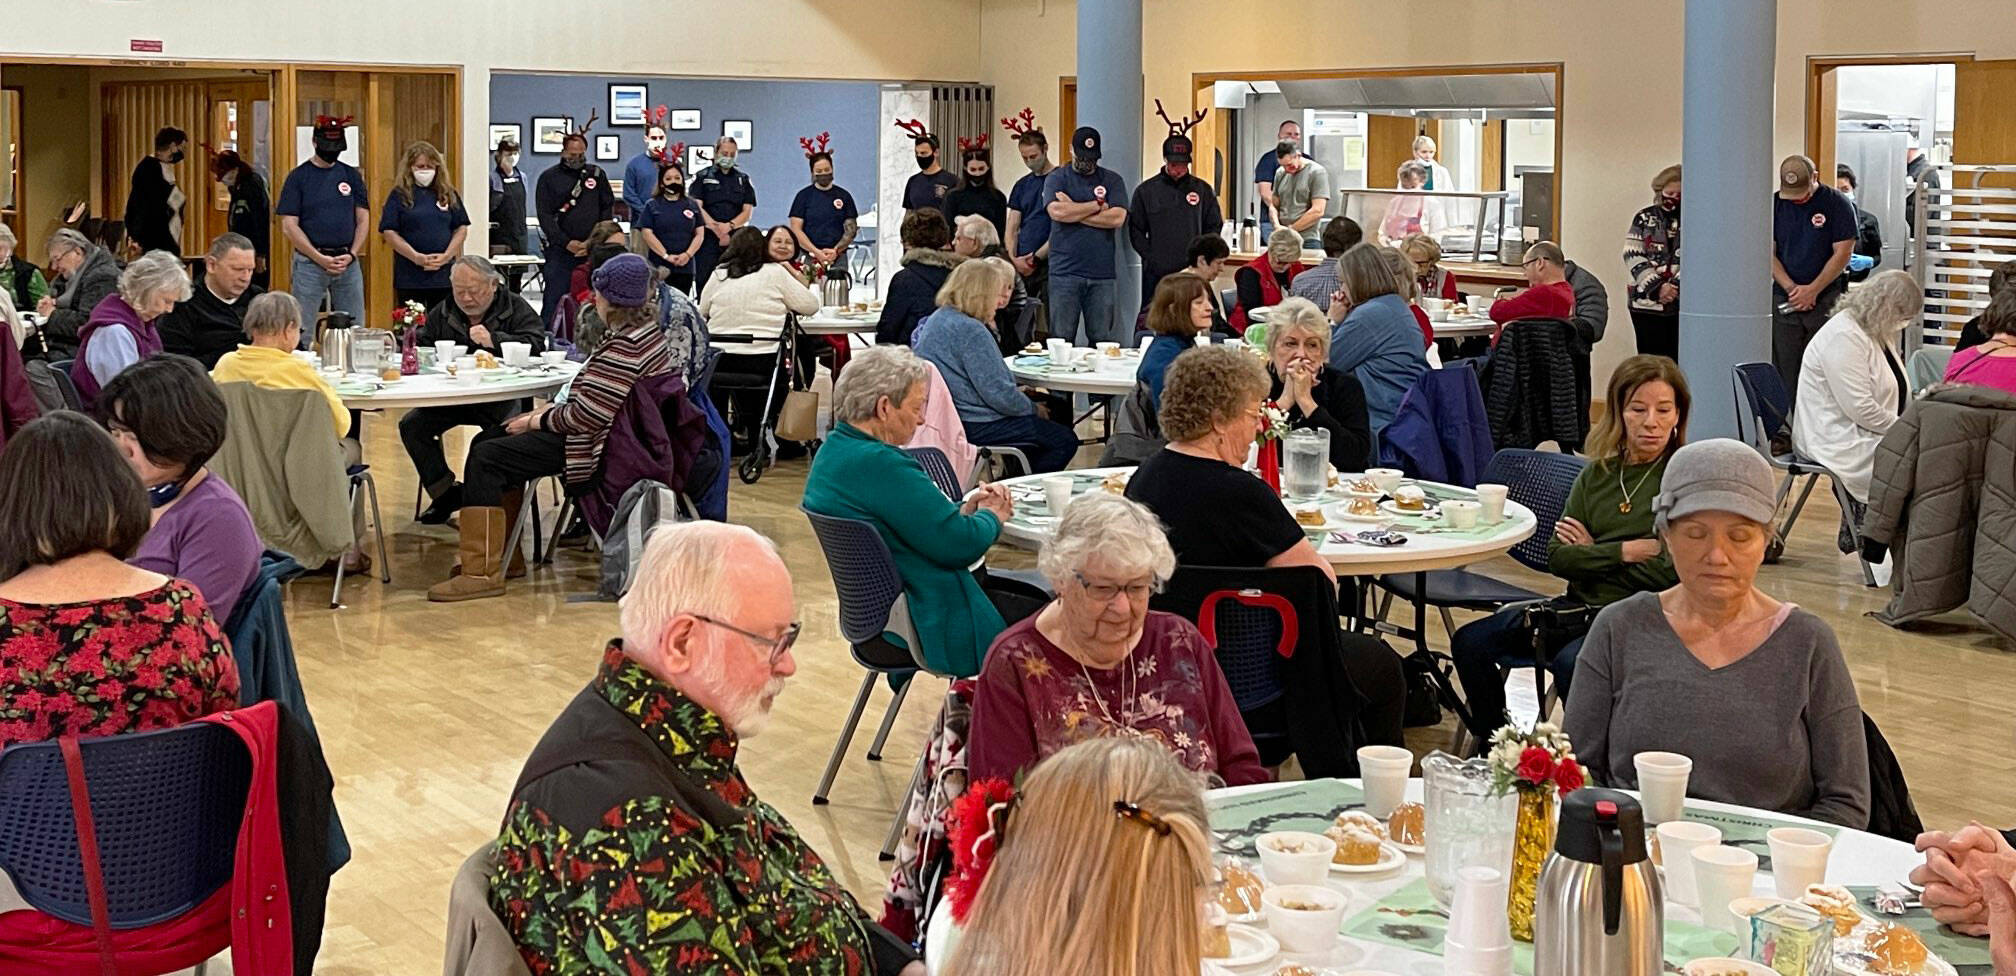 Attendees bow their heads in prayer prior to a Dec. 10 holiday luncheon at the Kent Senior Center presented by Puget Sound Fire. COURTESY PHOTO, Puget Sound Fire